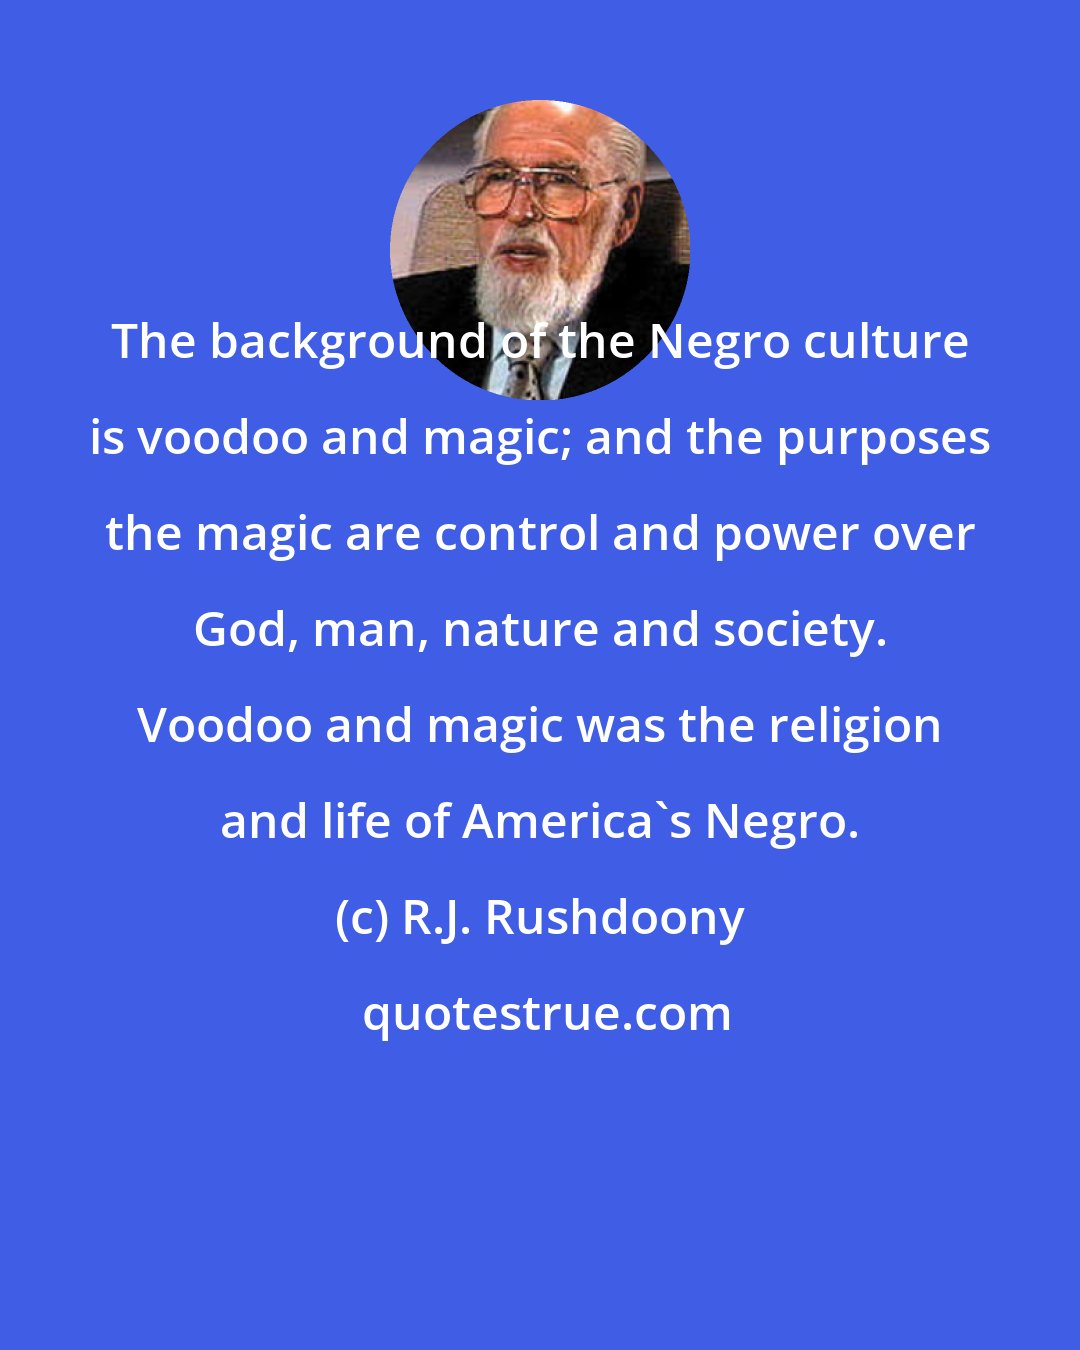 R.J. Rushdoony: The background of the Negro culture is voodoo and magic; and the purposes the magic are control and power over God, man, nature and society. Voodoo and magic was the religion and life of America's Negro.